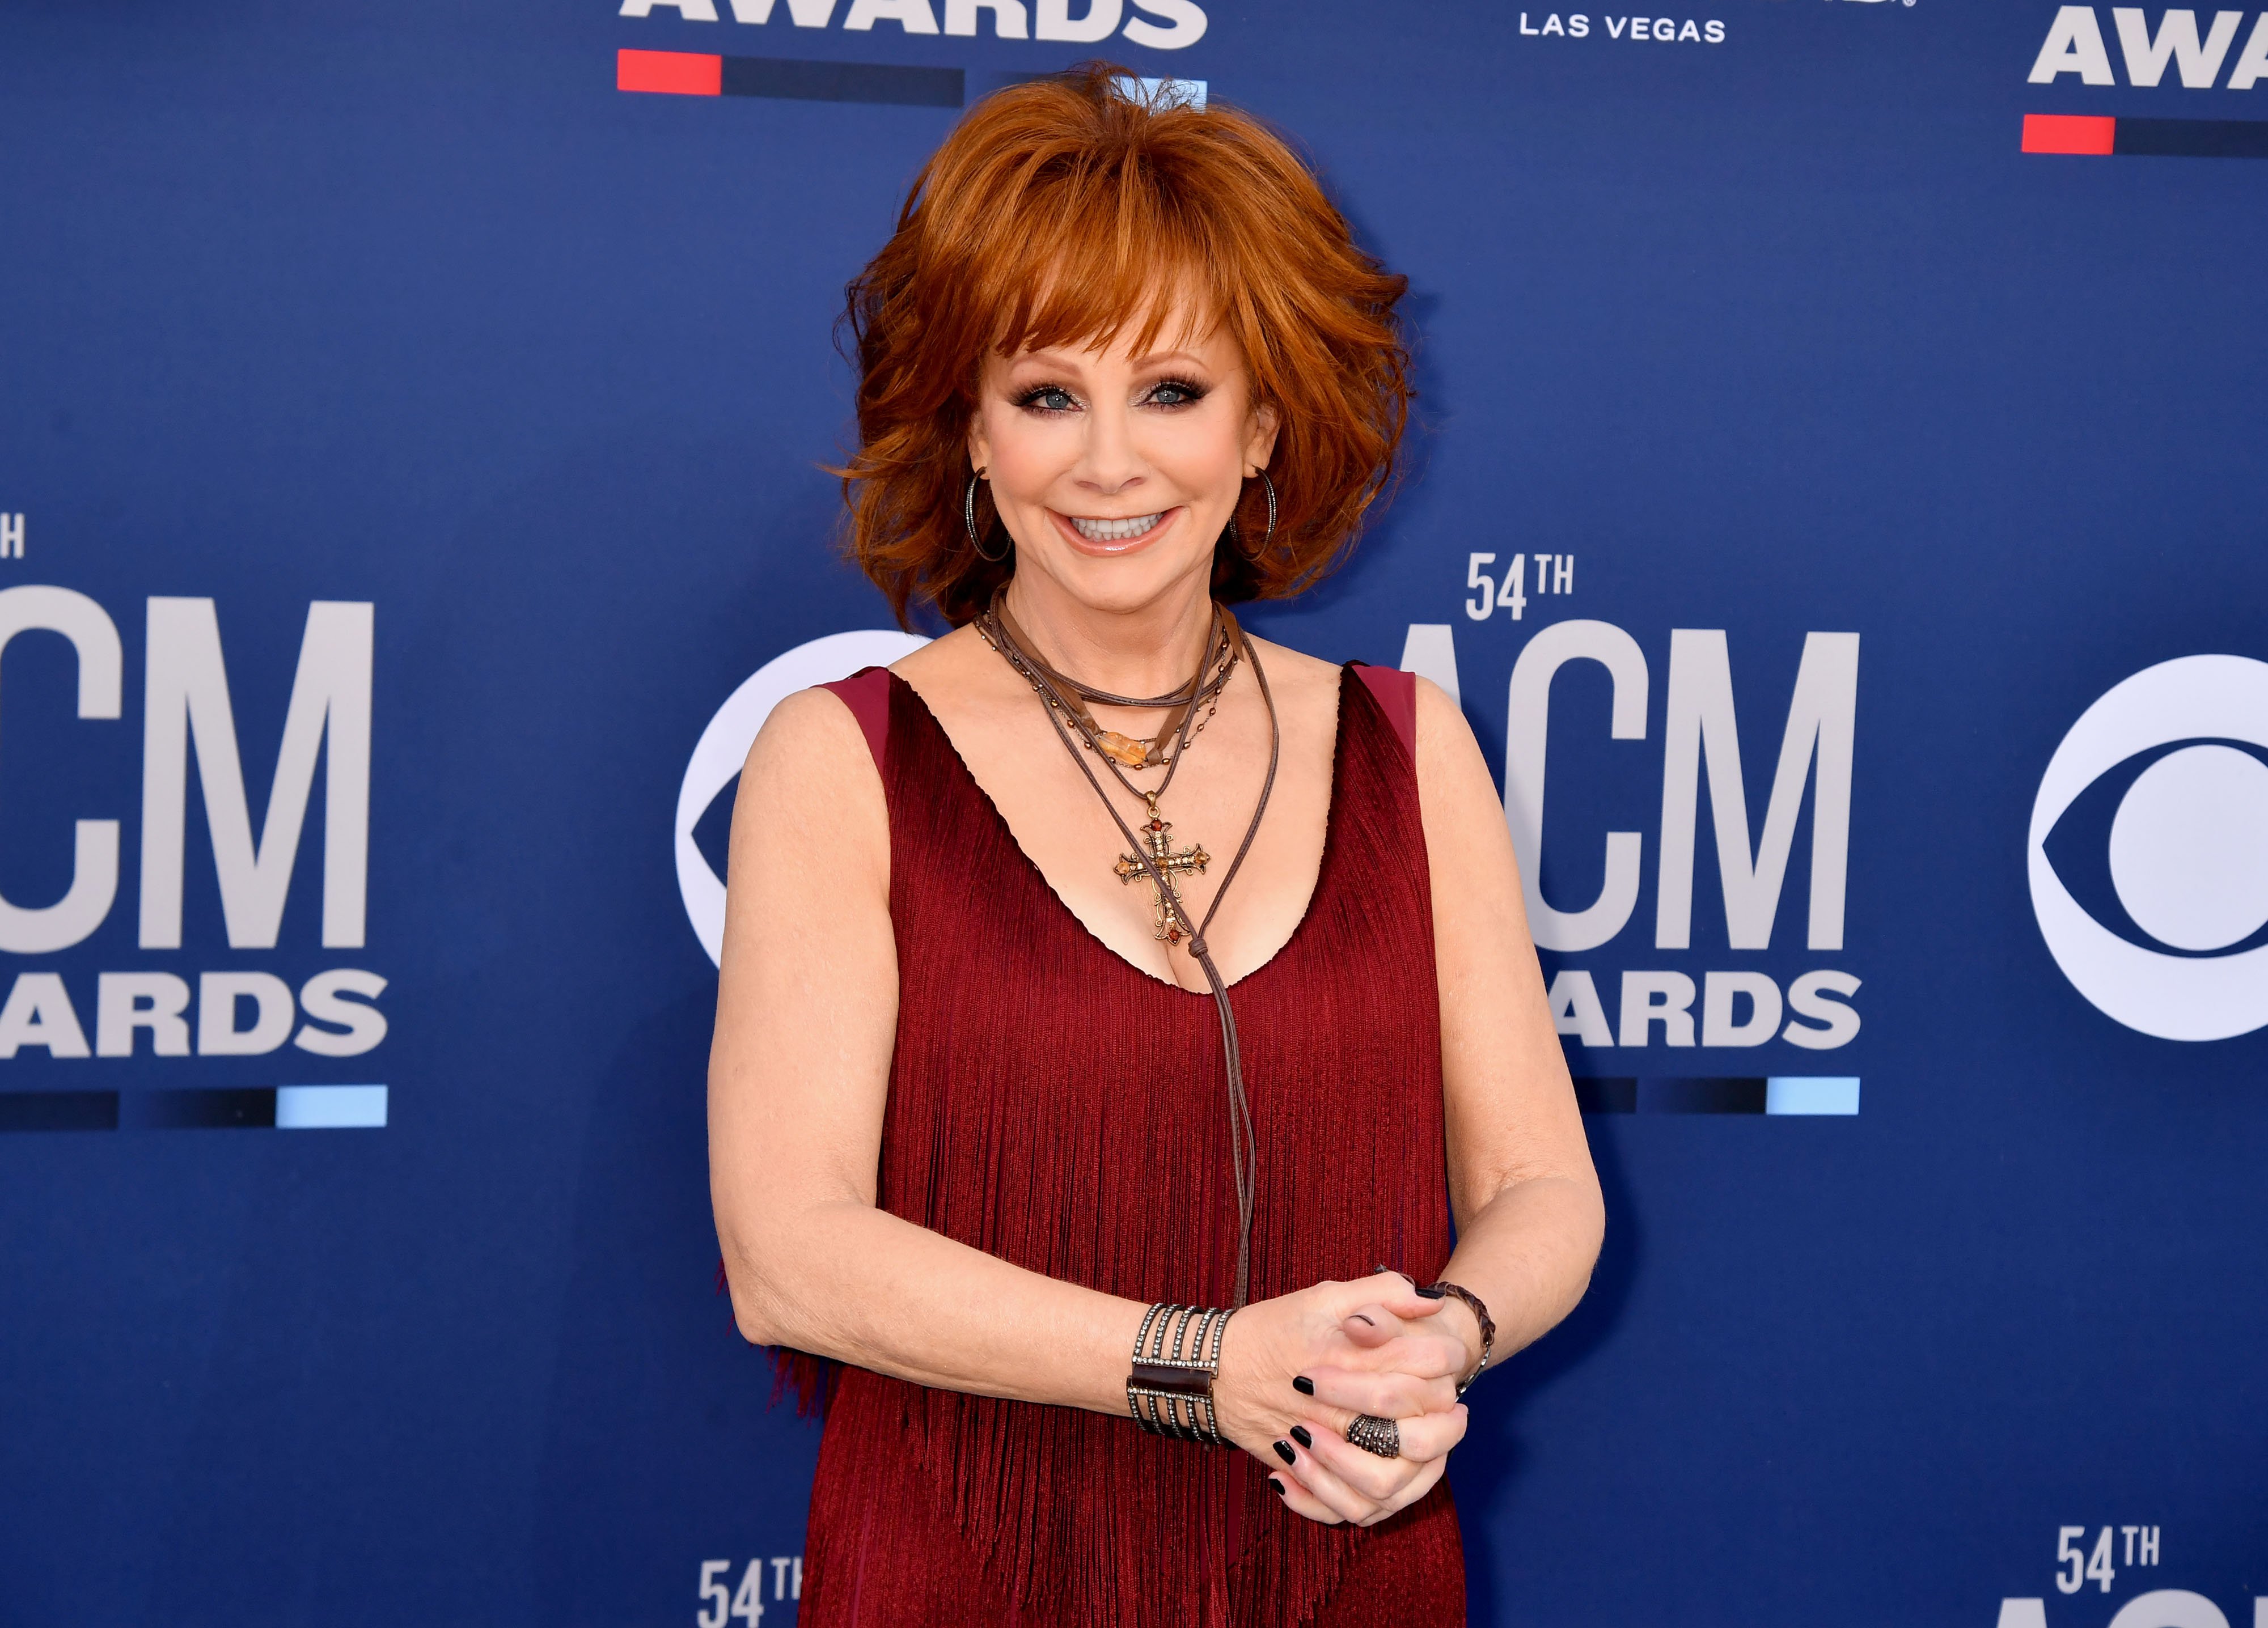 Reba McEntire attends the 54th Academy Of Country Music Awards |  Jeff Kravitz/FilmMagic